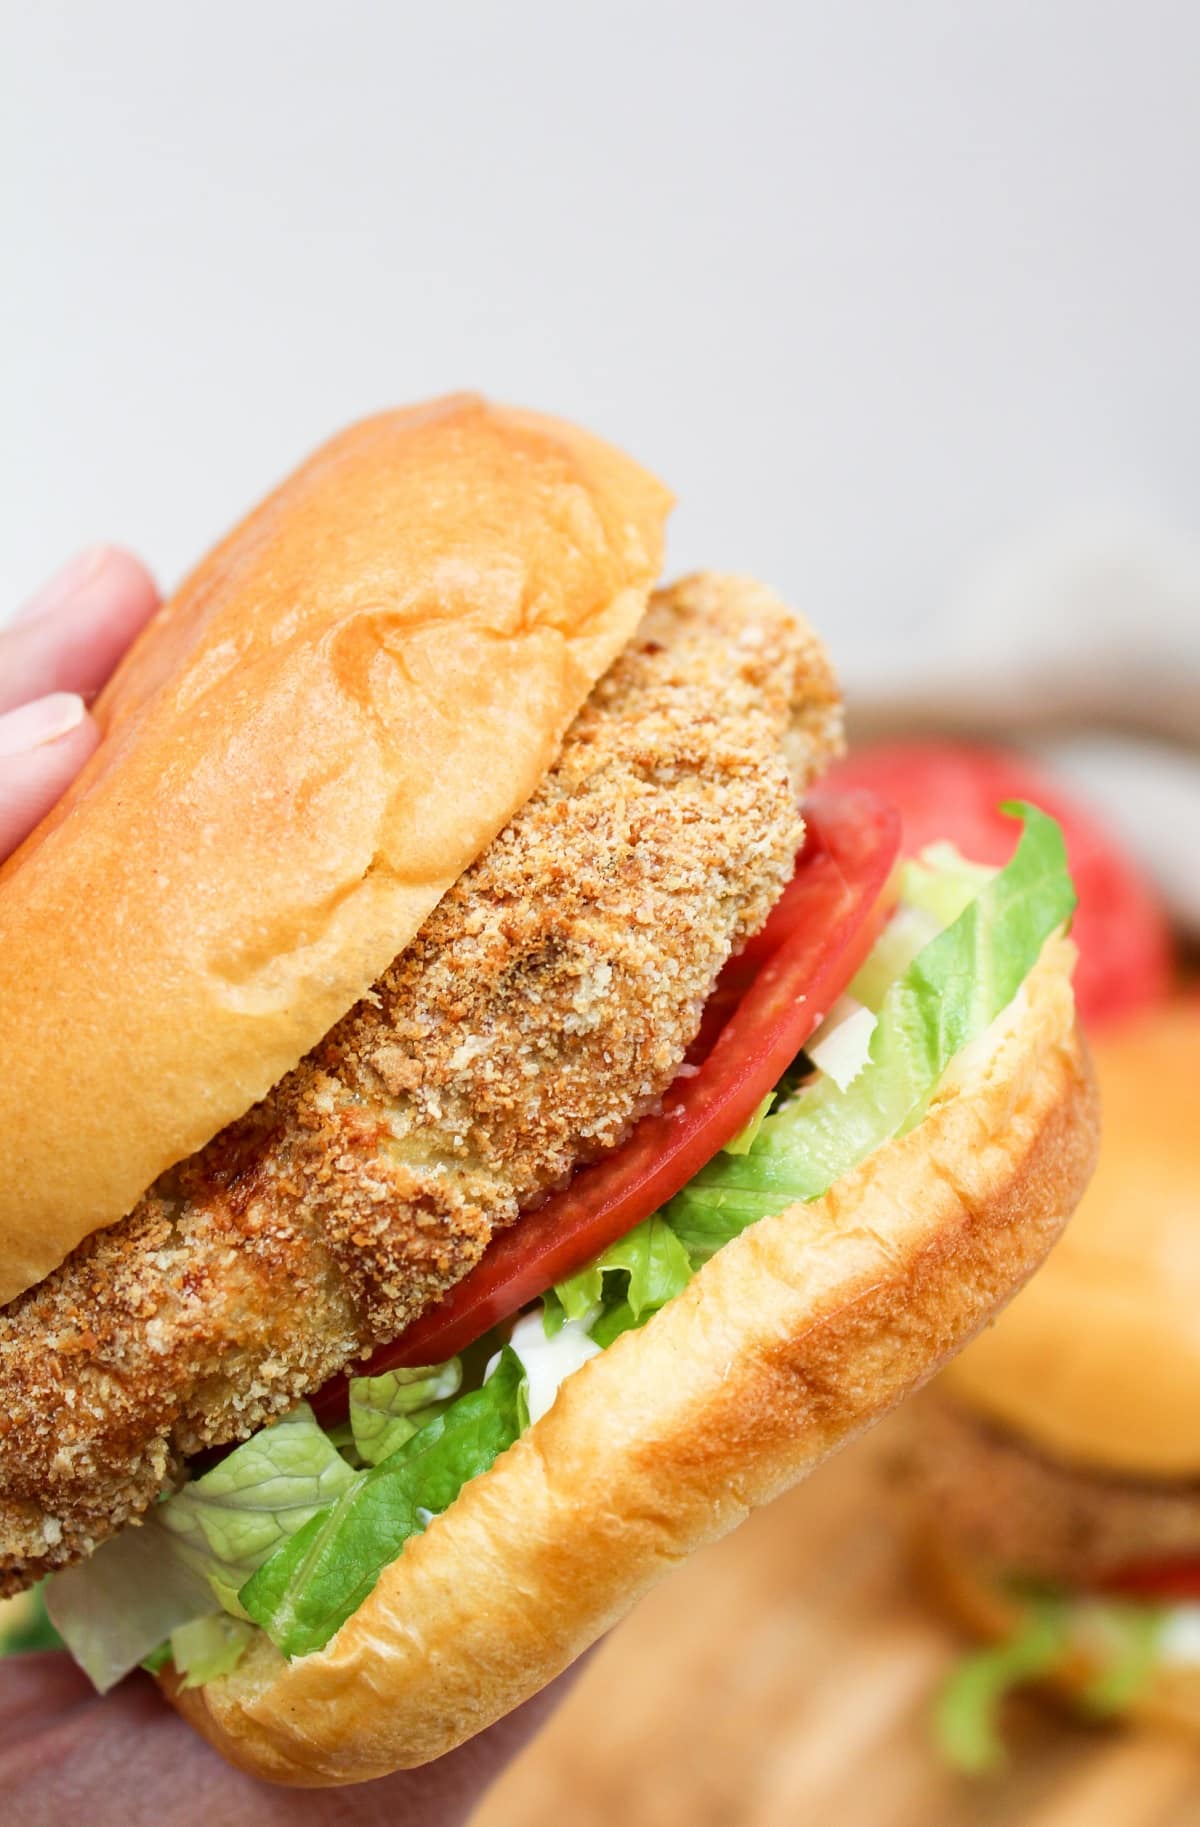 crispy chicken patty on a bun with shredded lettuce and sliced tomato held in hand.